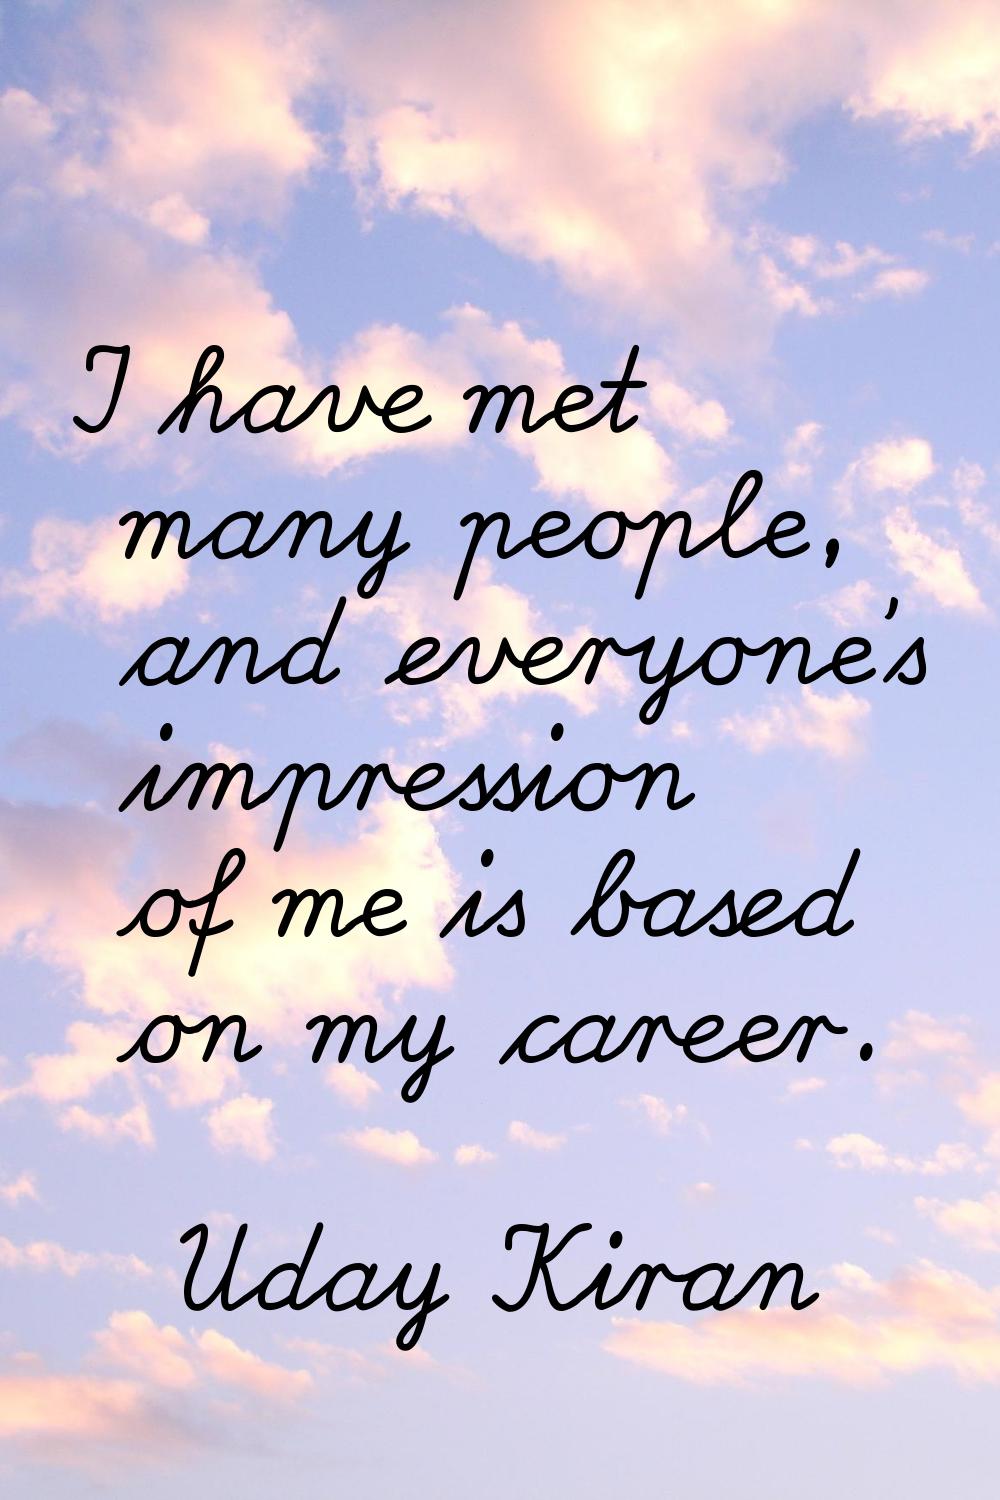 I have met many people, and everyone's impression of me is based on my career.